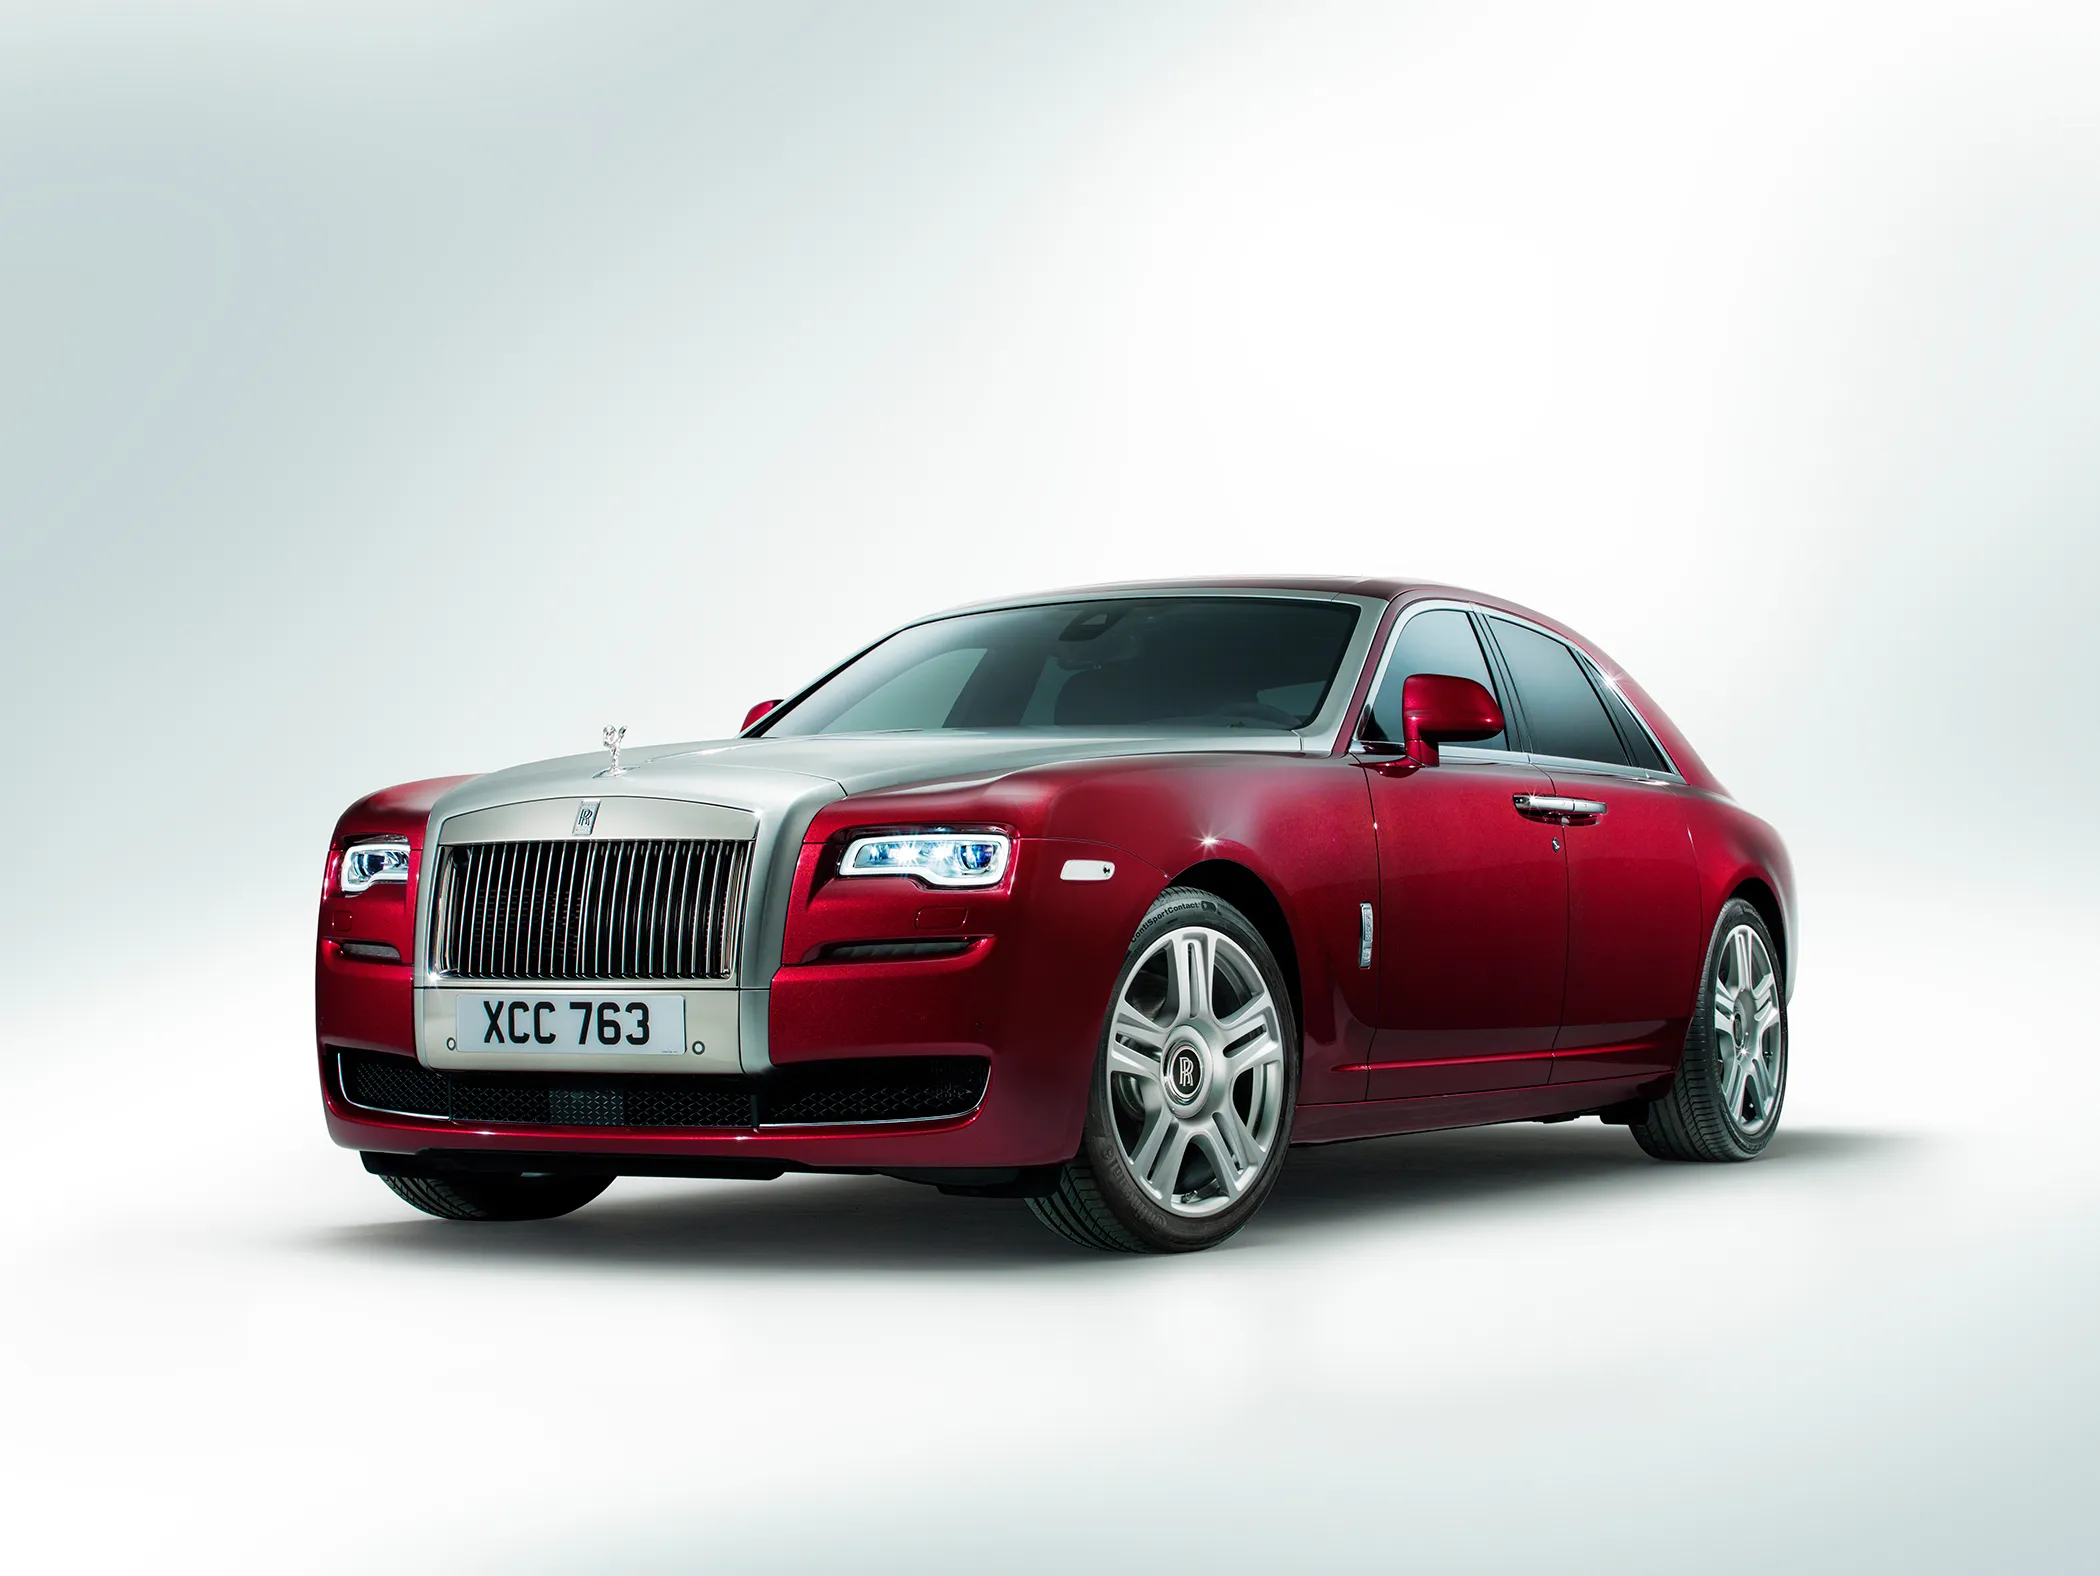 Rolls-Royce shares 15 secrets surrounding the mysticism of its cars